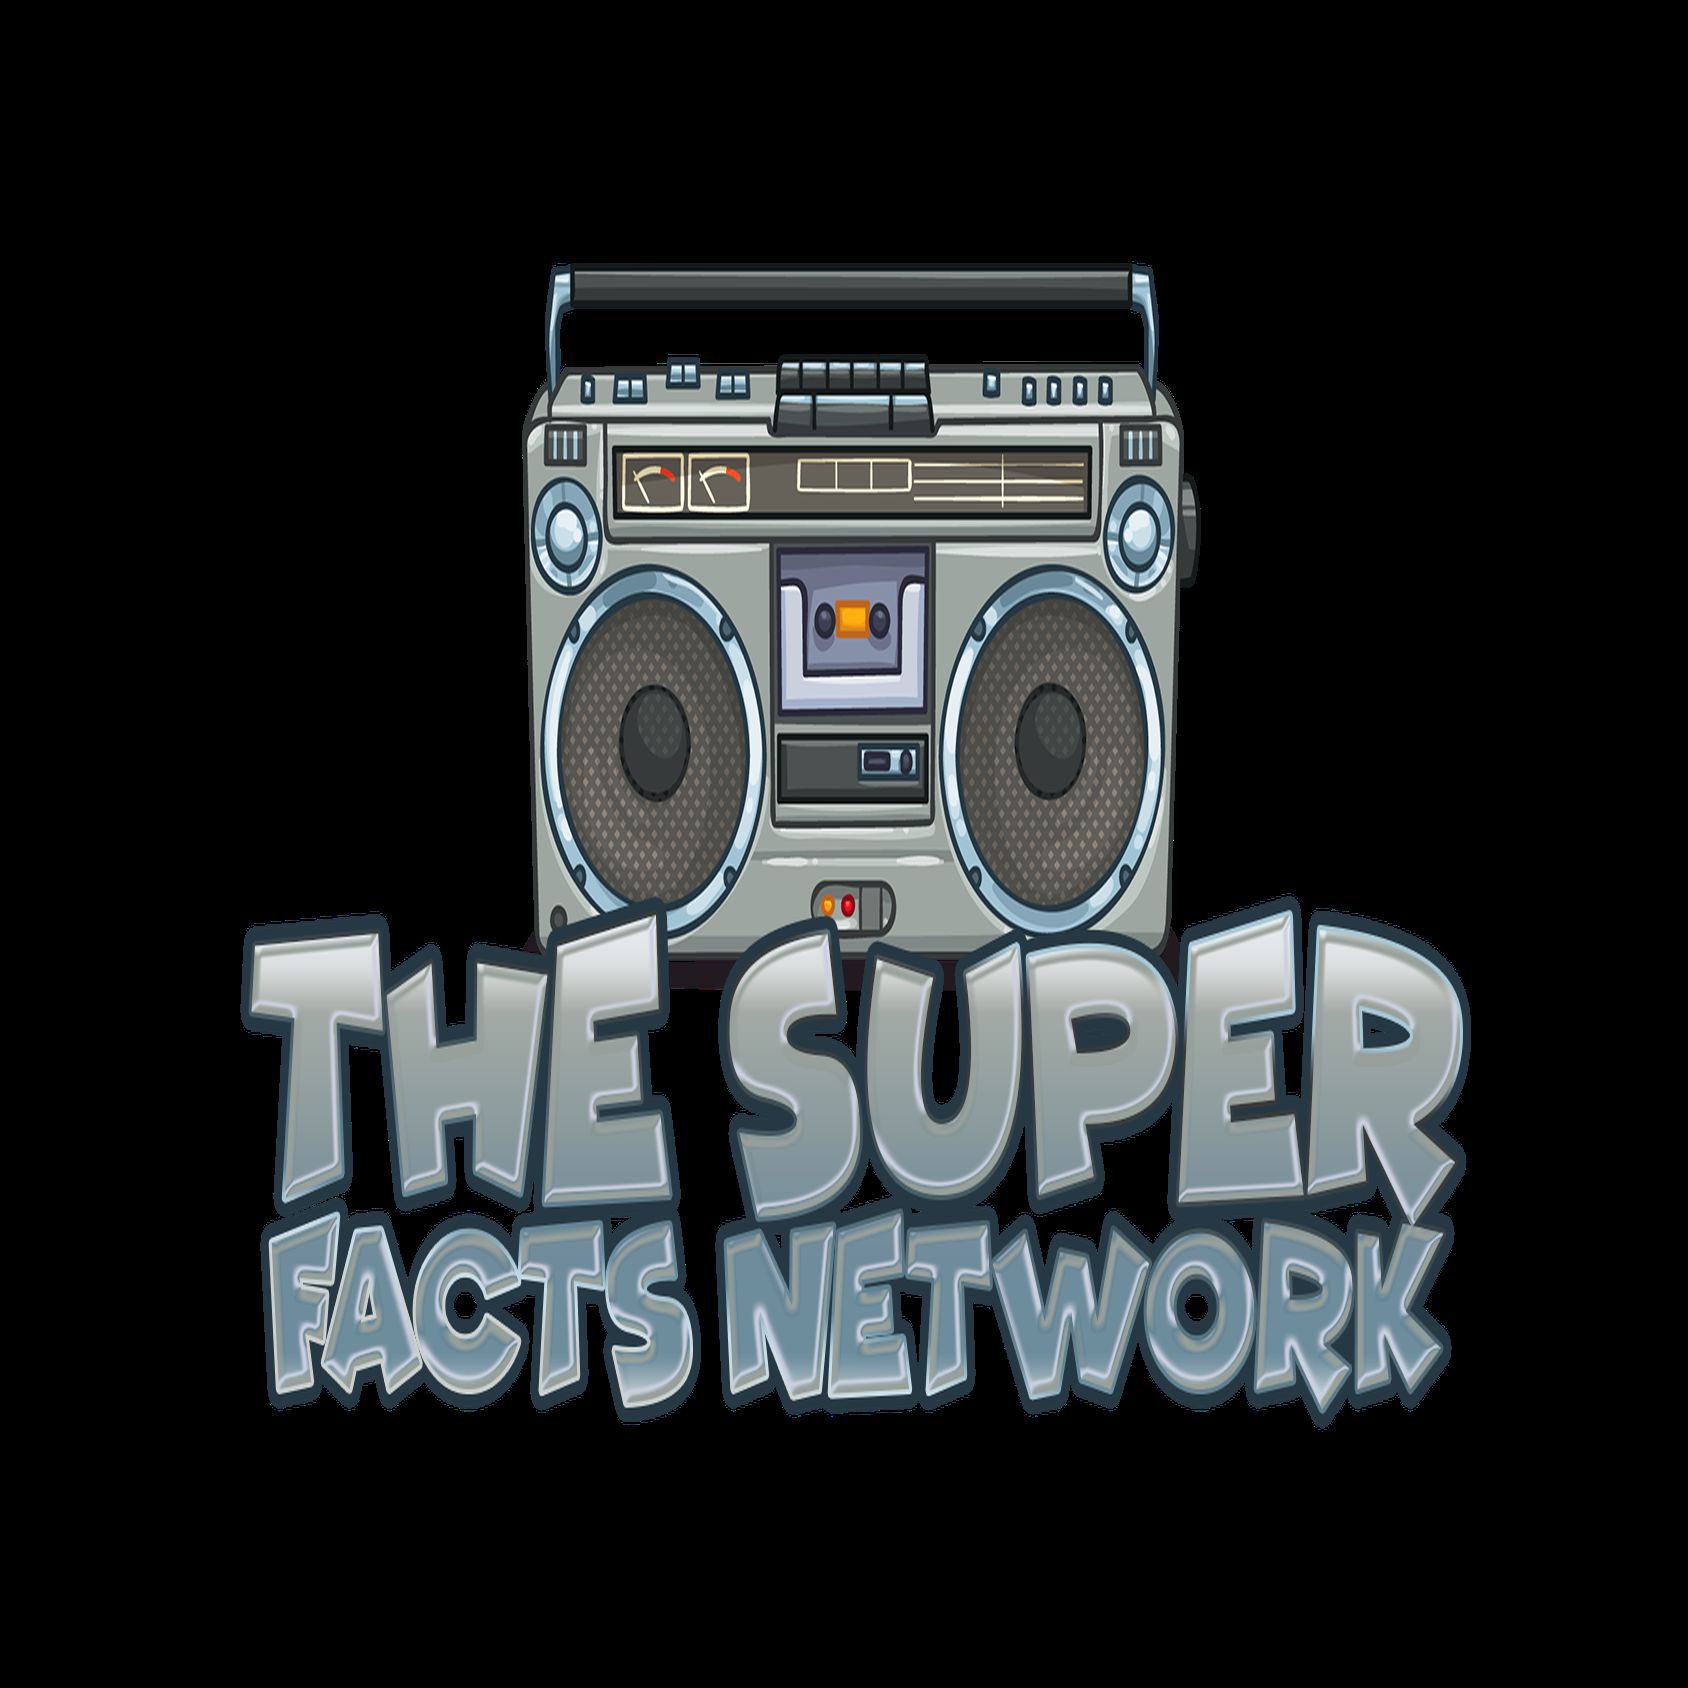 The Best of The Super Facts Network